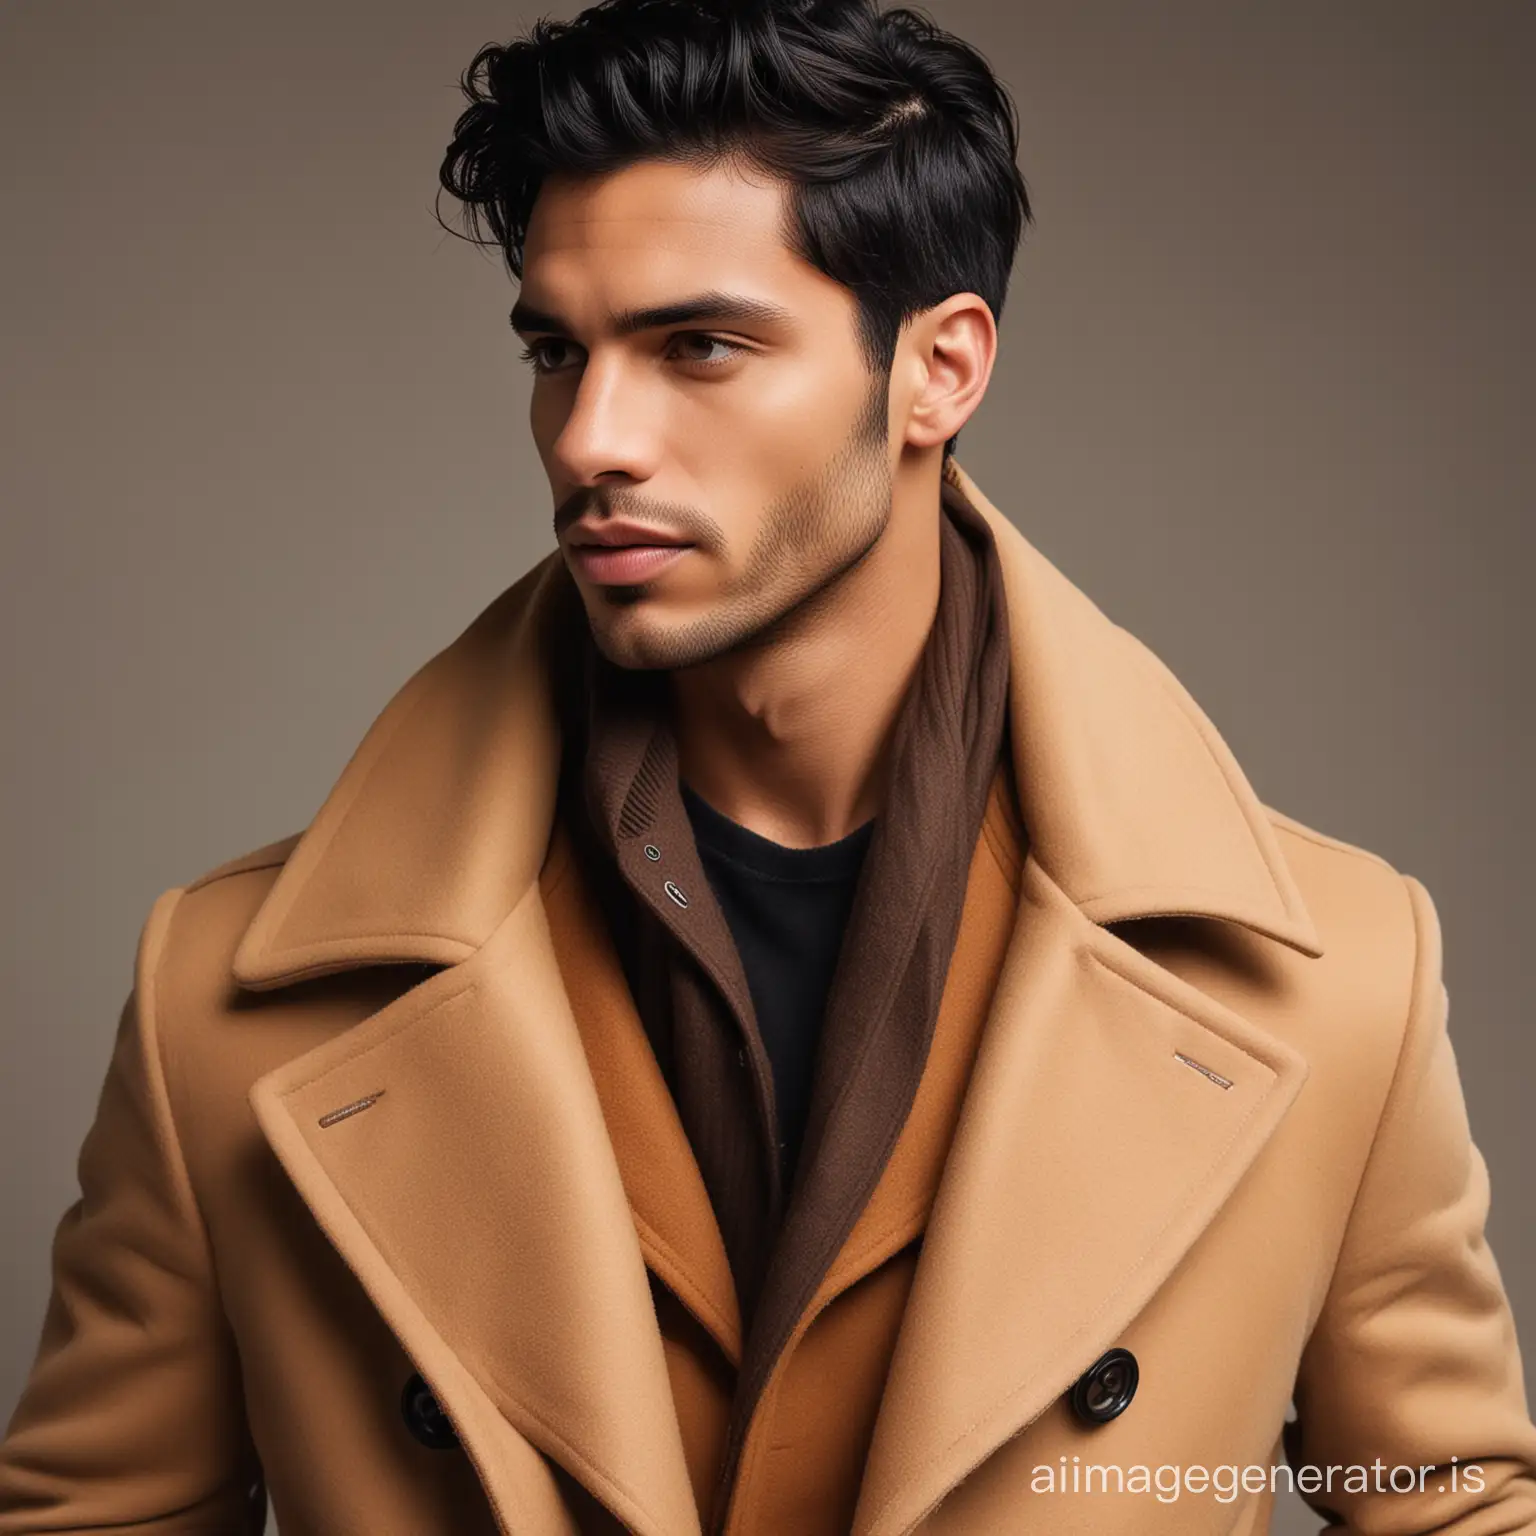 A stylish black hair man with brown coat